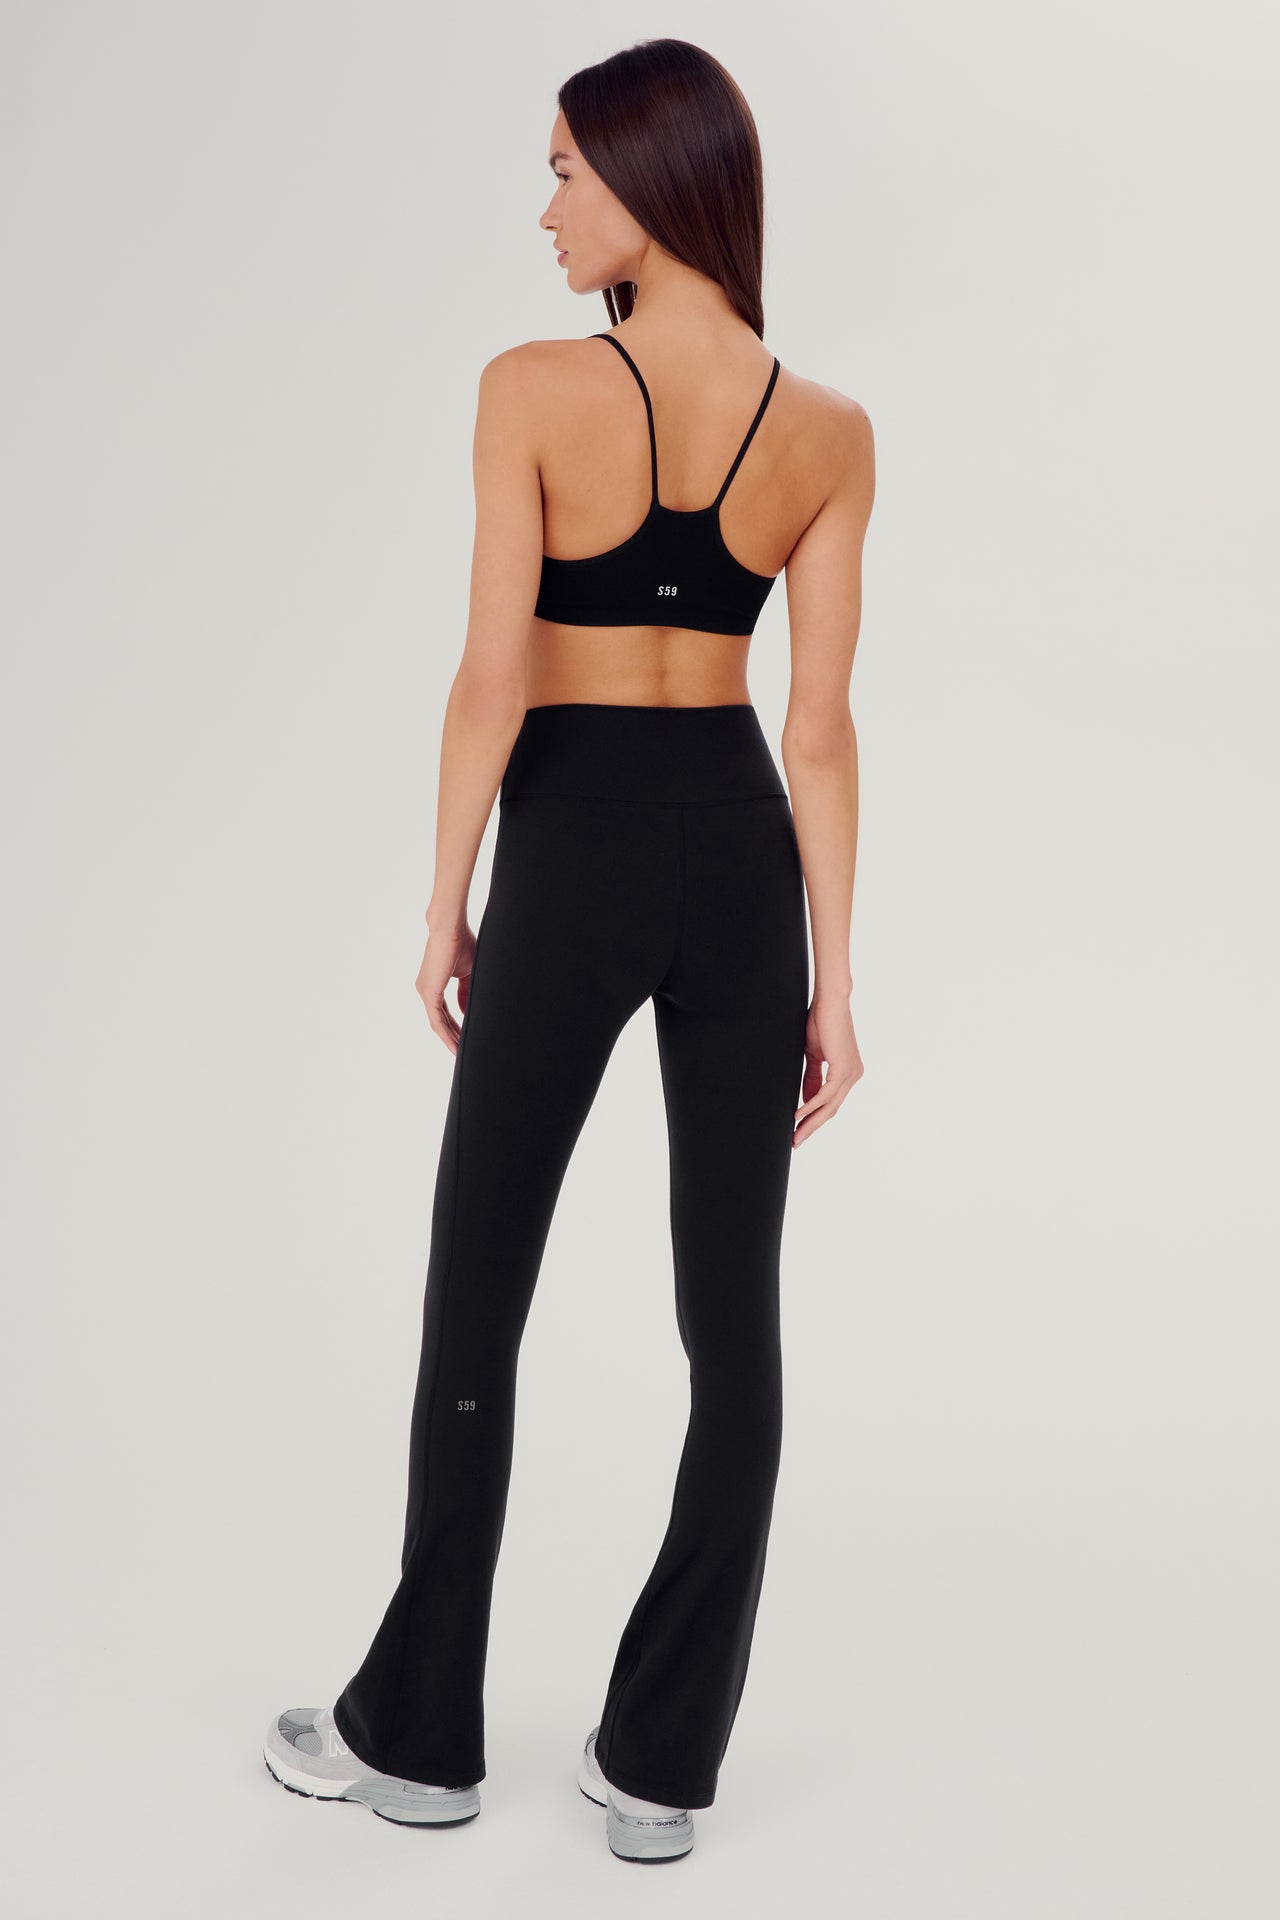 Full back view of woman wearing black high waist below ankle length legging with wide flared bottoms and gray S59 logo on bottom left calf. Also wearing black racerback bra with spaghetti straps and white S59 logo on back. Paired with white and gray shoes.